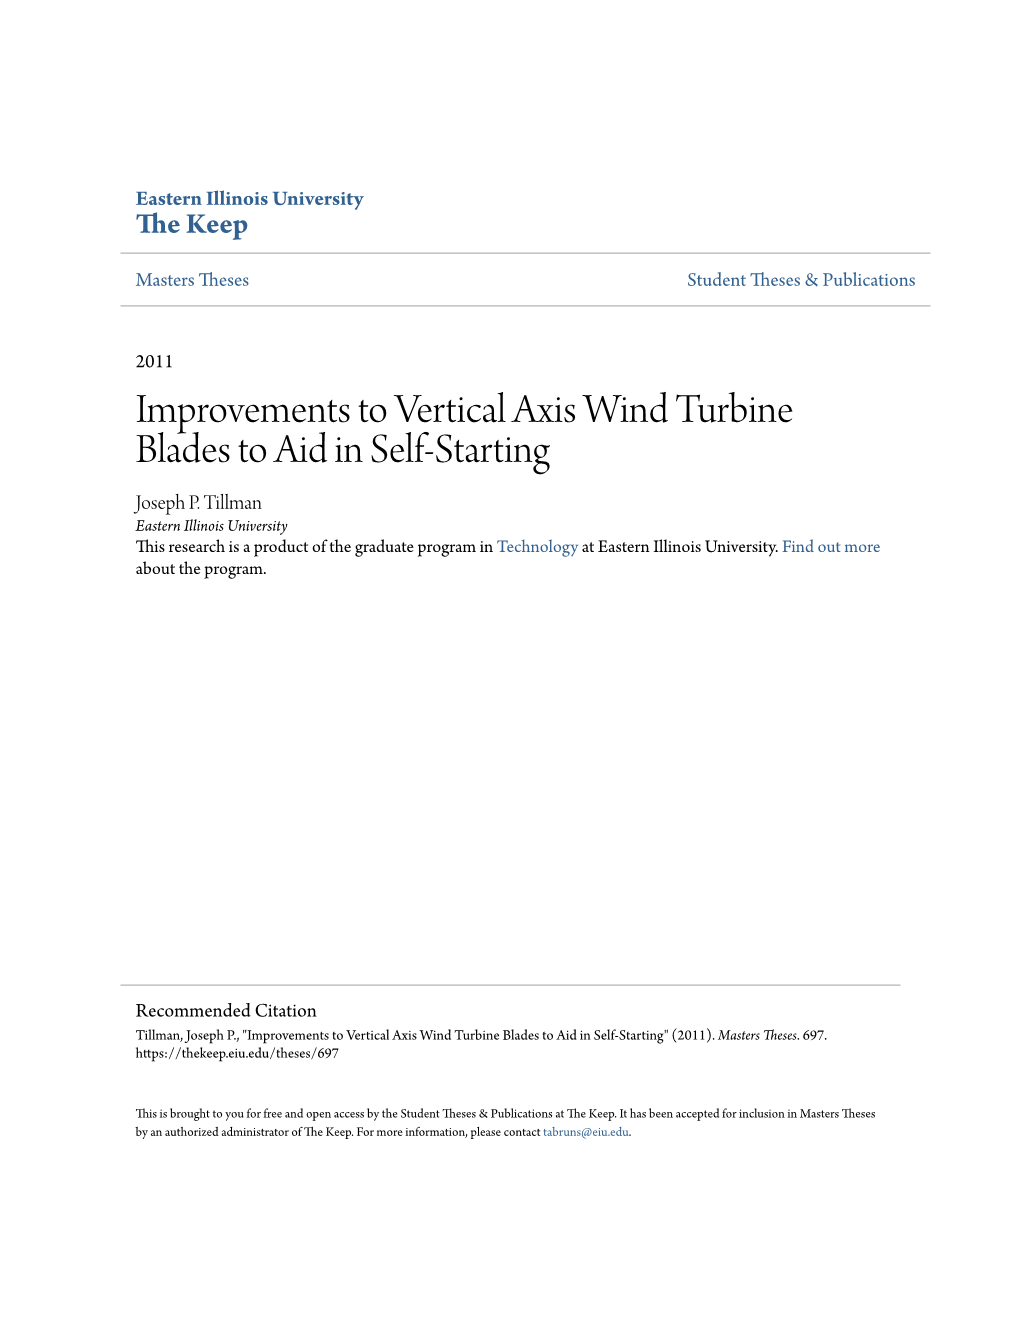 Improvements to Vertical Axis Wind Turbine Blades to Aid in Self-Starting Joseph P